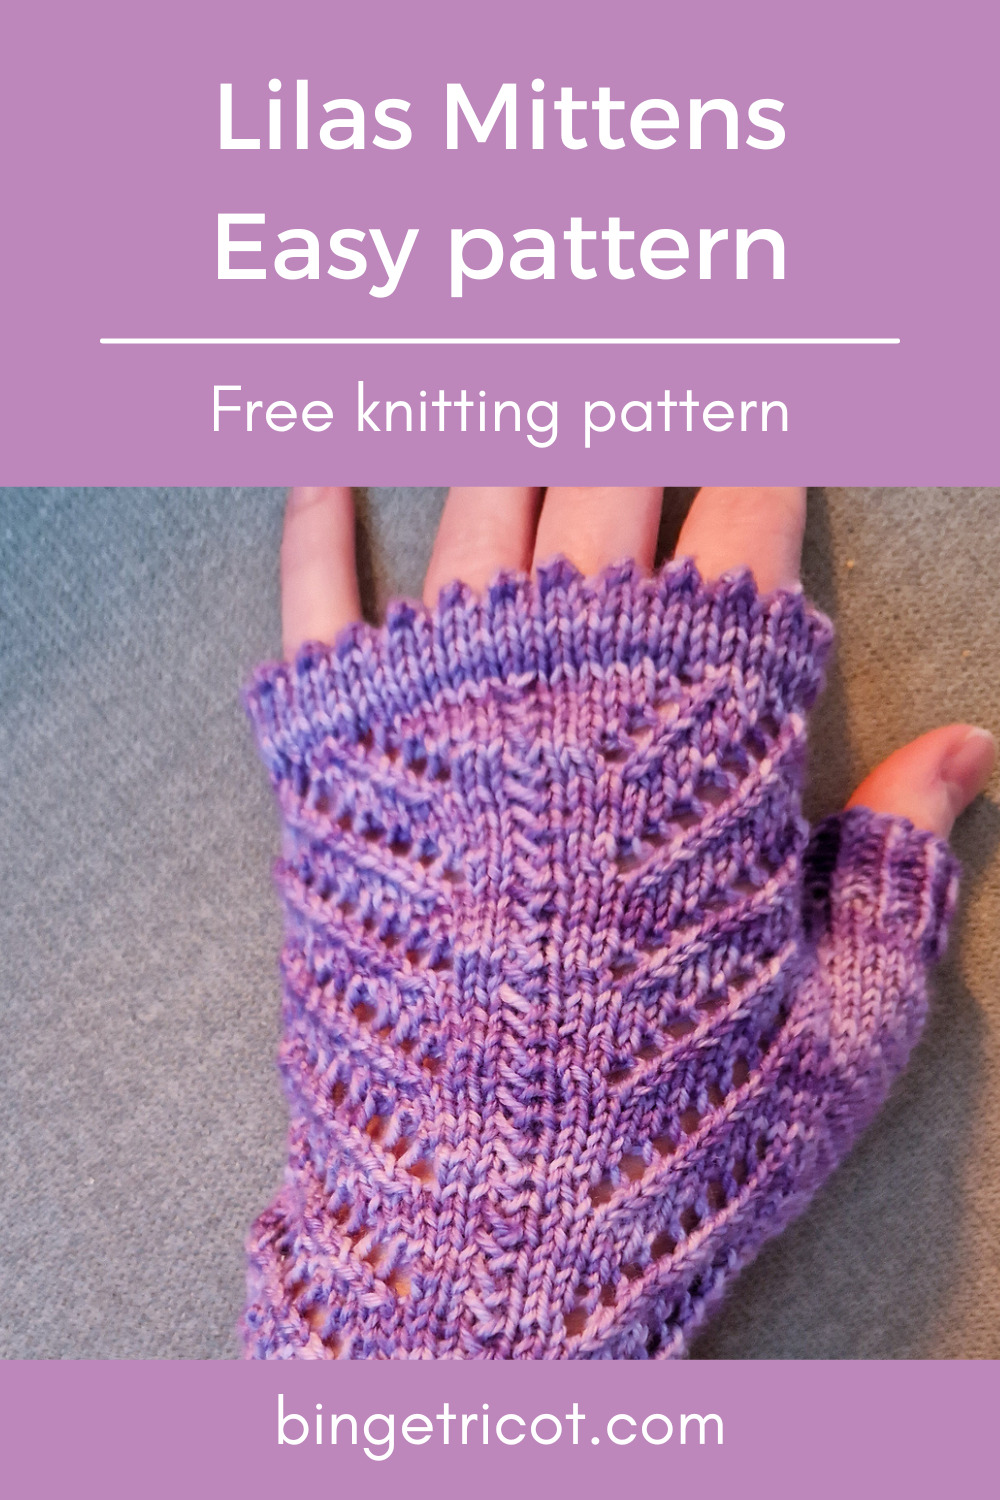 The Lilas fingerless mittens, free knitting pattern for lace fingerless ...